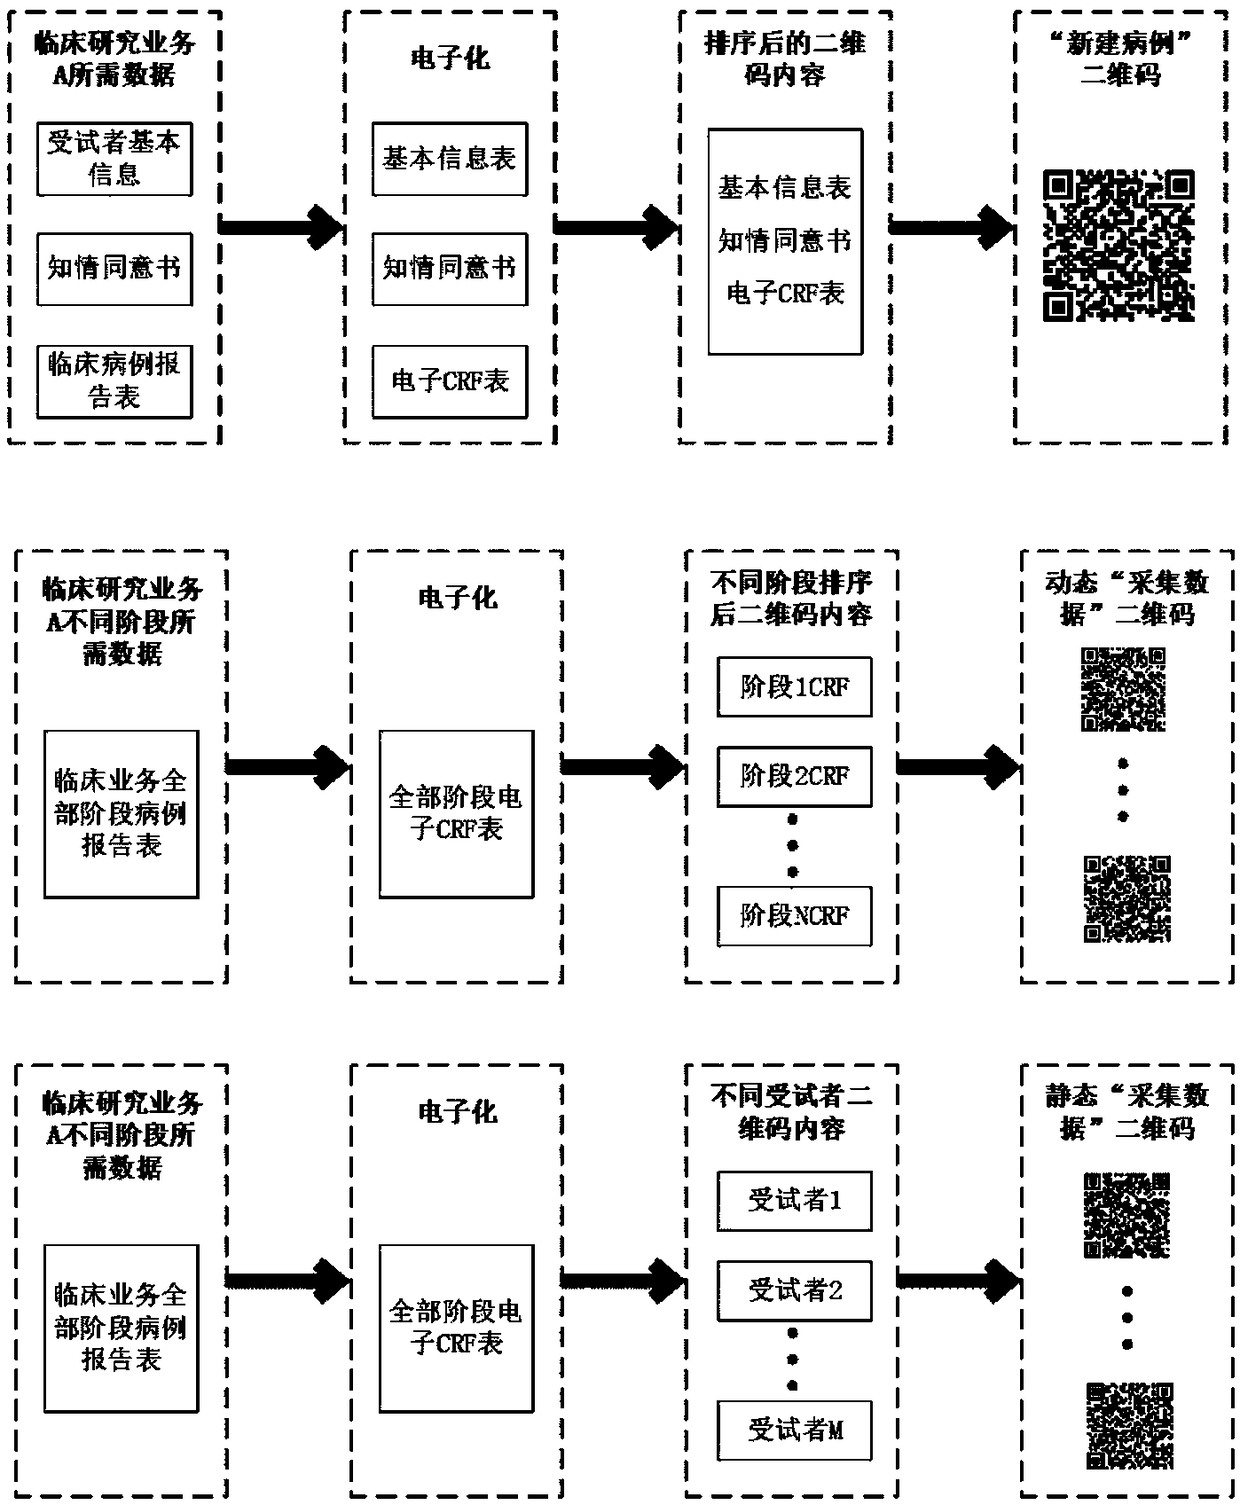 Clinical data collection method based on two-dimensional codes